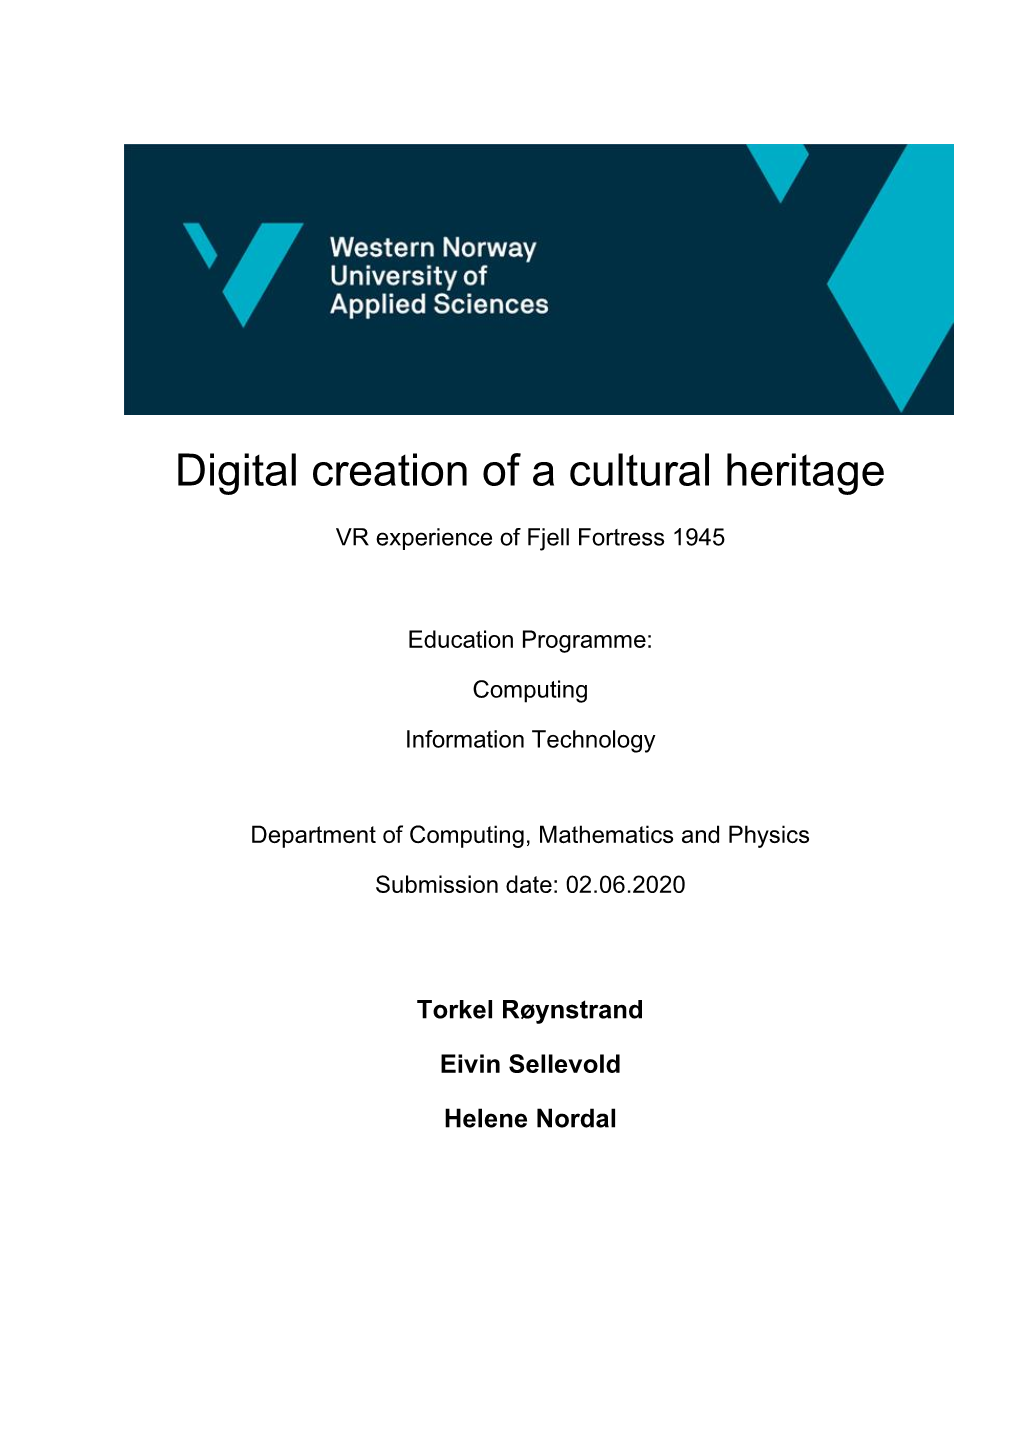 Digital Creation of a Cultural Heritage